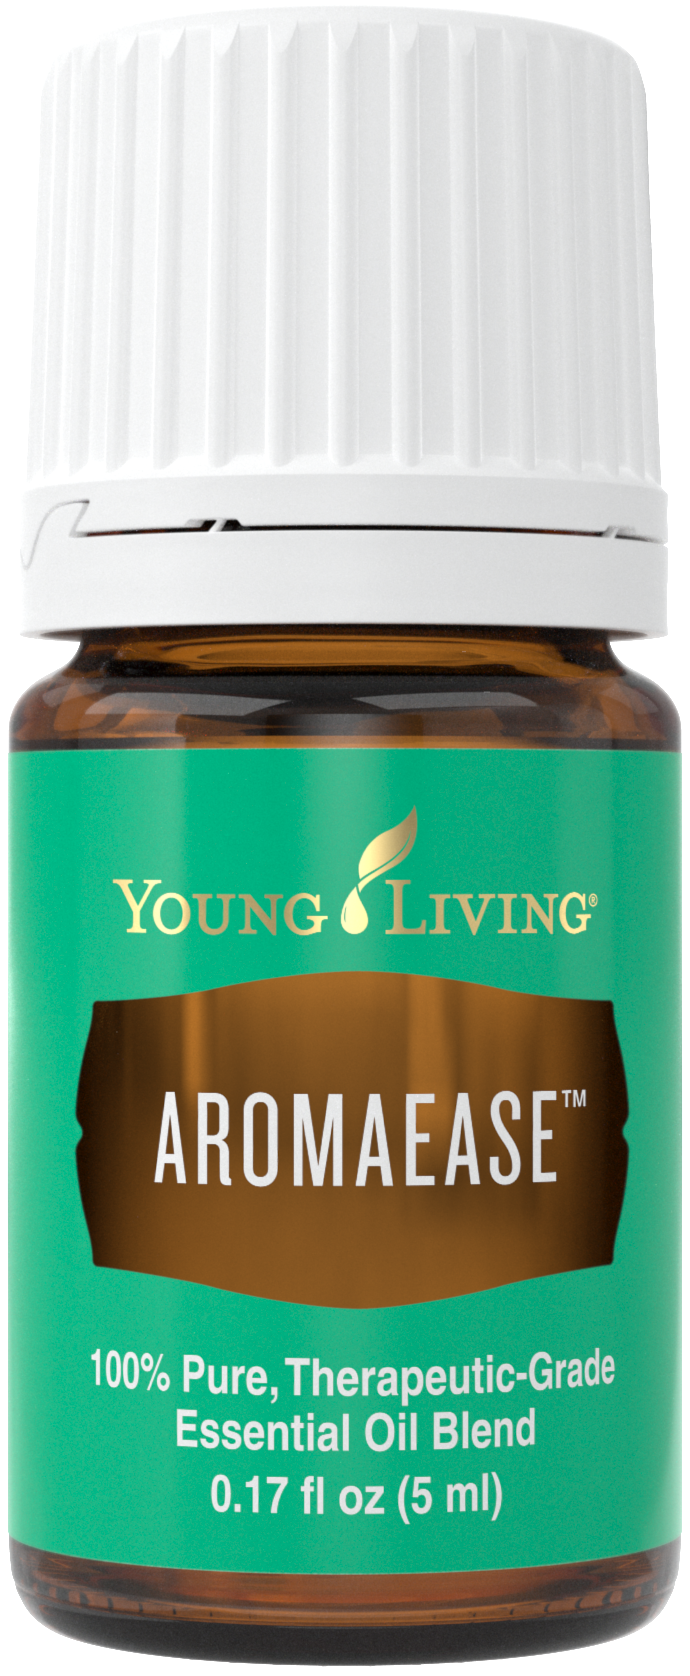 Aromaease 5ml Silo.png